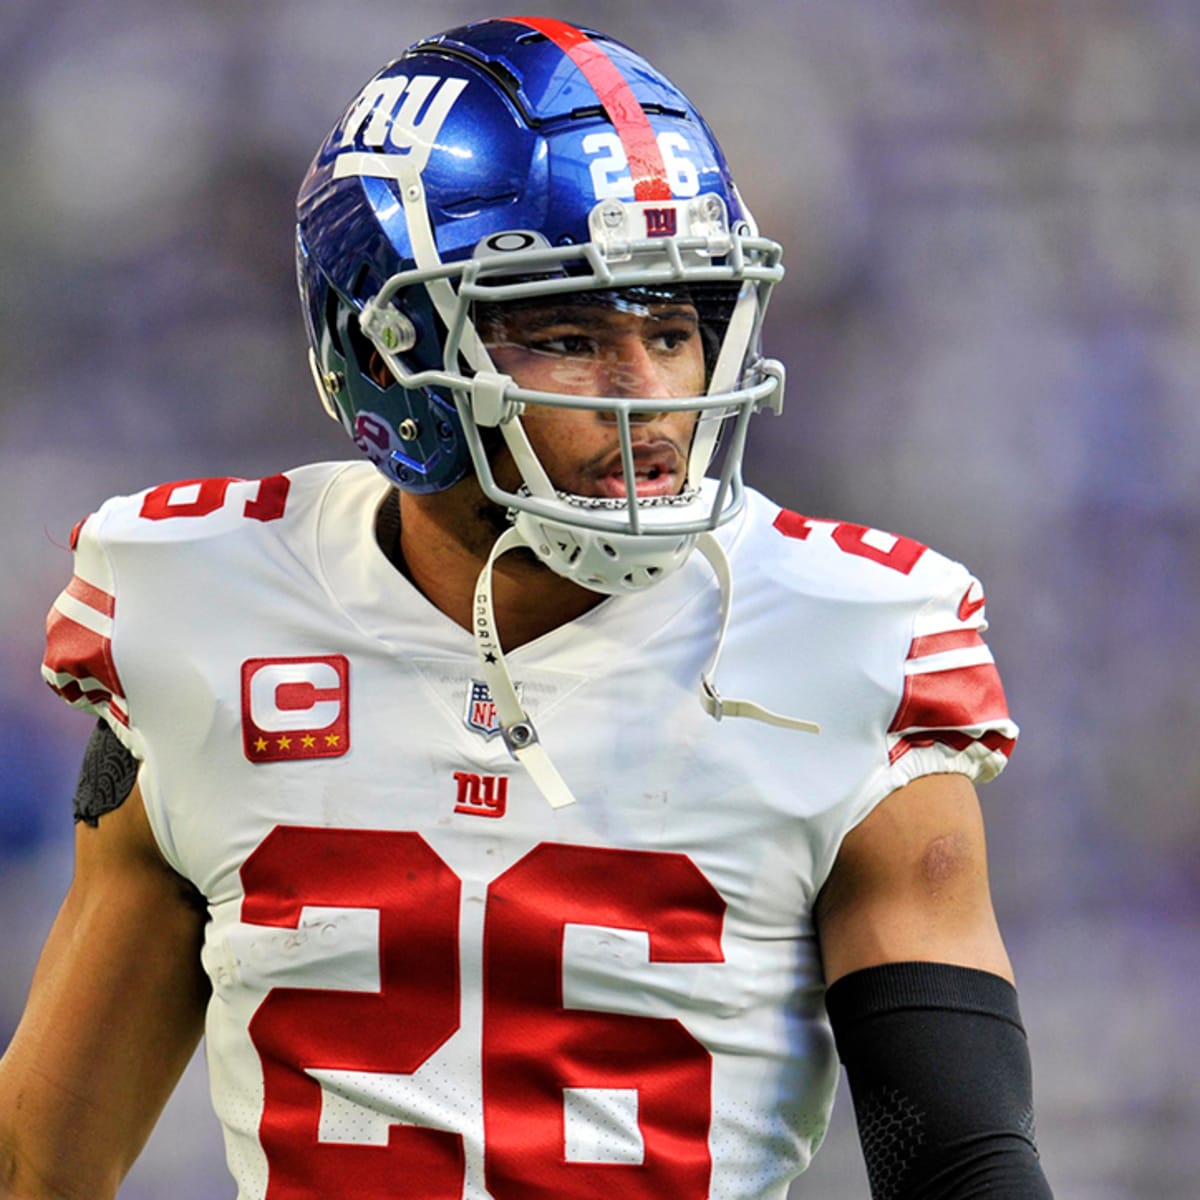 Biggest offseason contract issues for the Giants